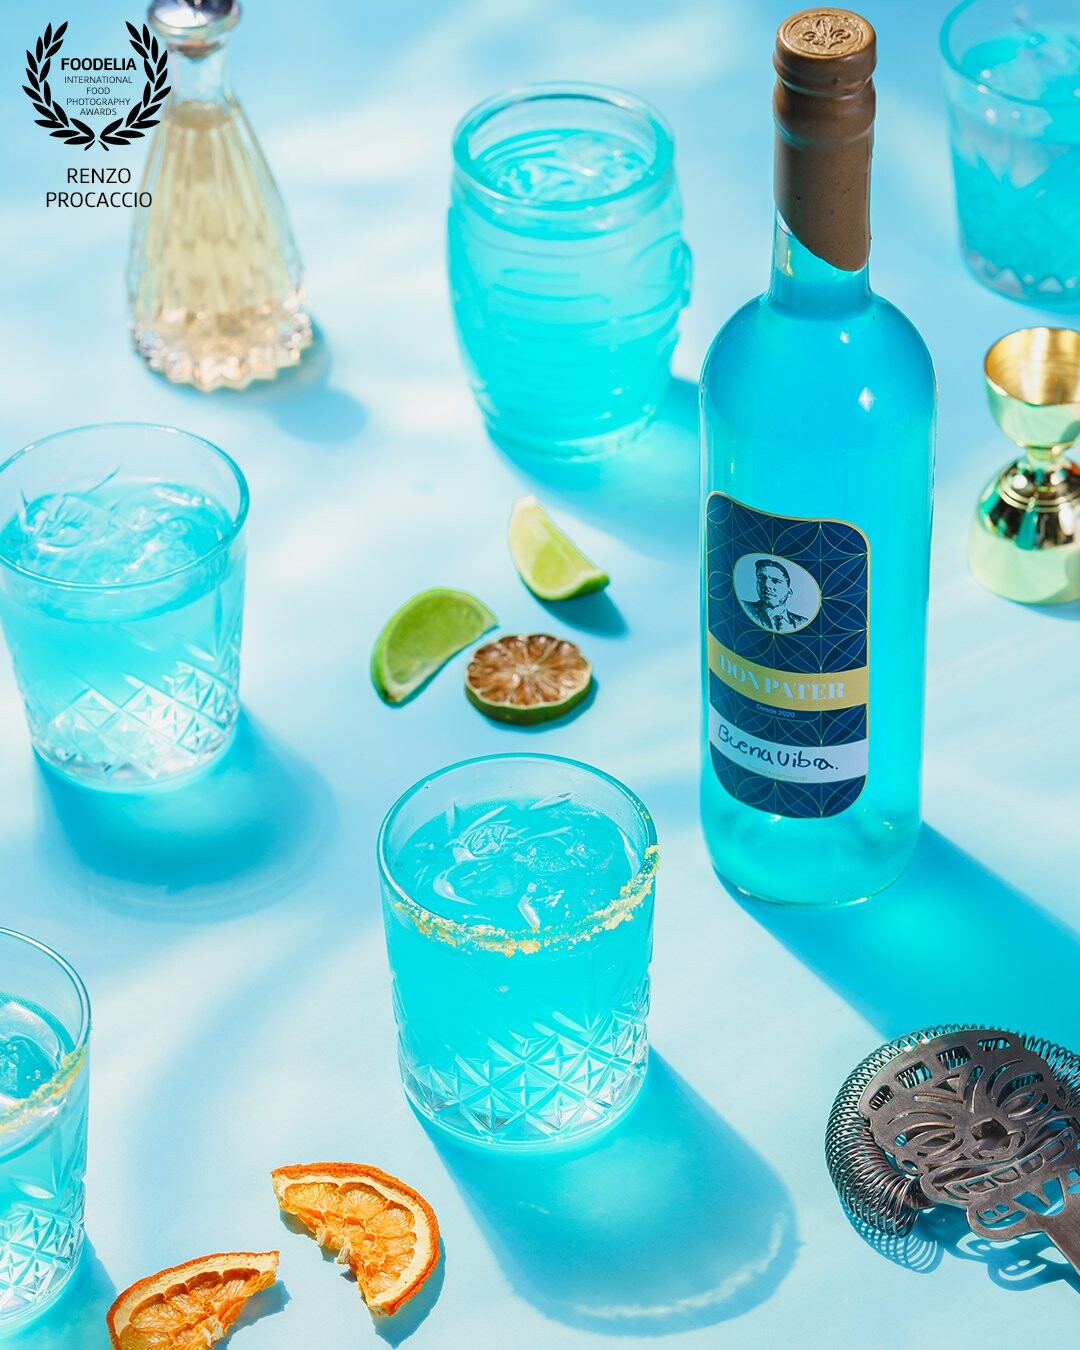 El Buena Vibra is a cocktail with coconut flavored rum, blue curacao and other secrets, created in a bar that no longer exists in the city of Maracaibo, Venezuela. Don Pater was in charge of creating his own version of this iconic drink, maintaining its tropical essence @coctelesdonpater